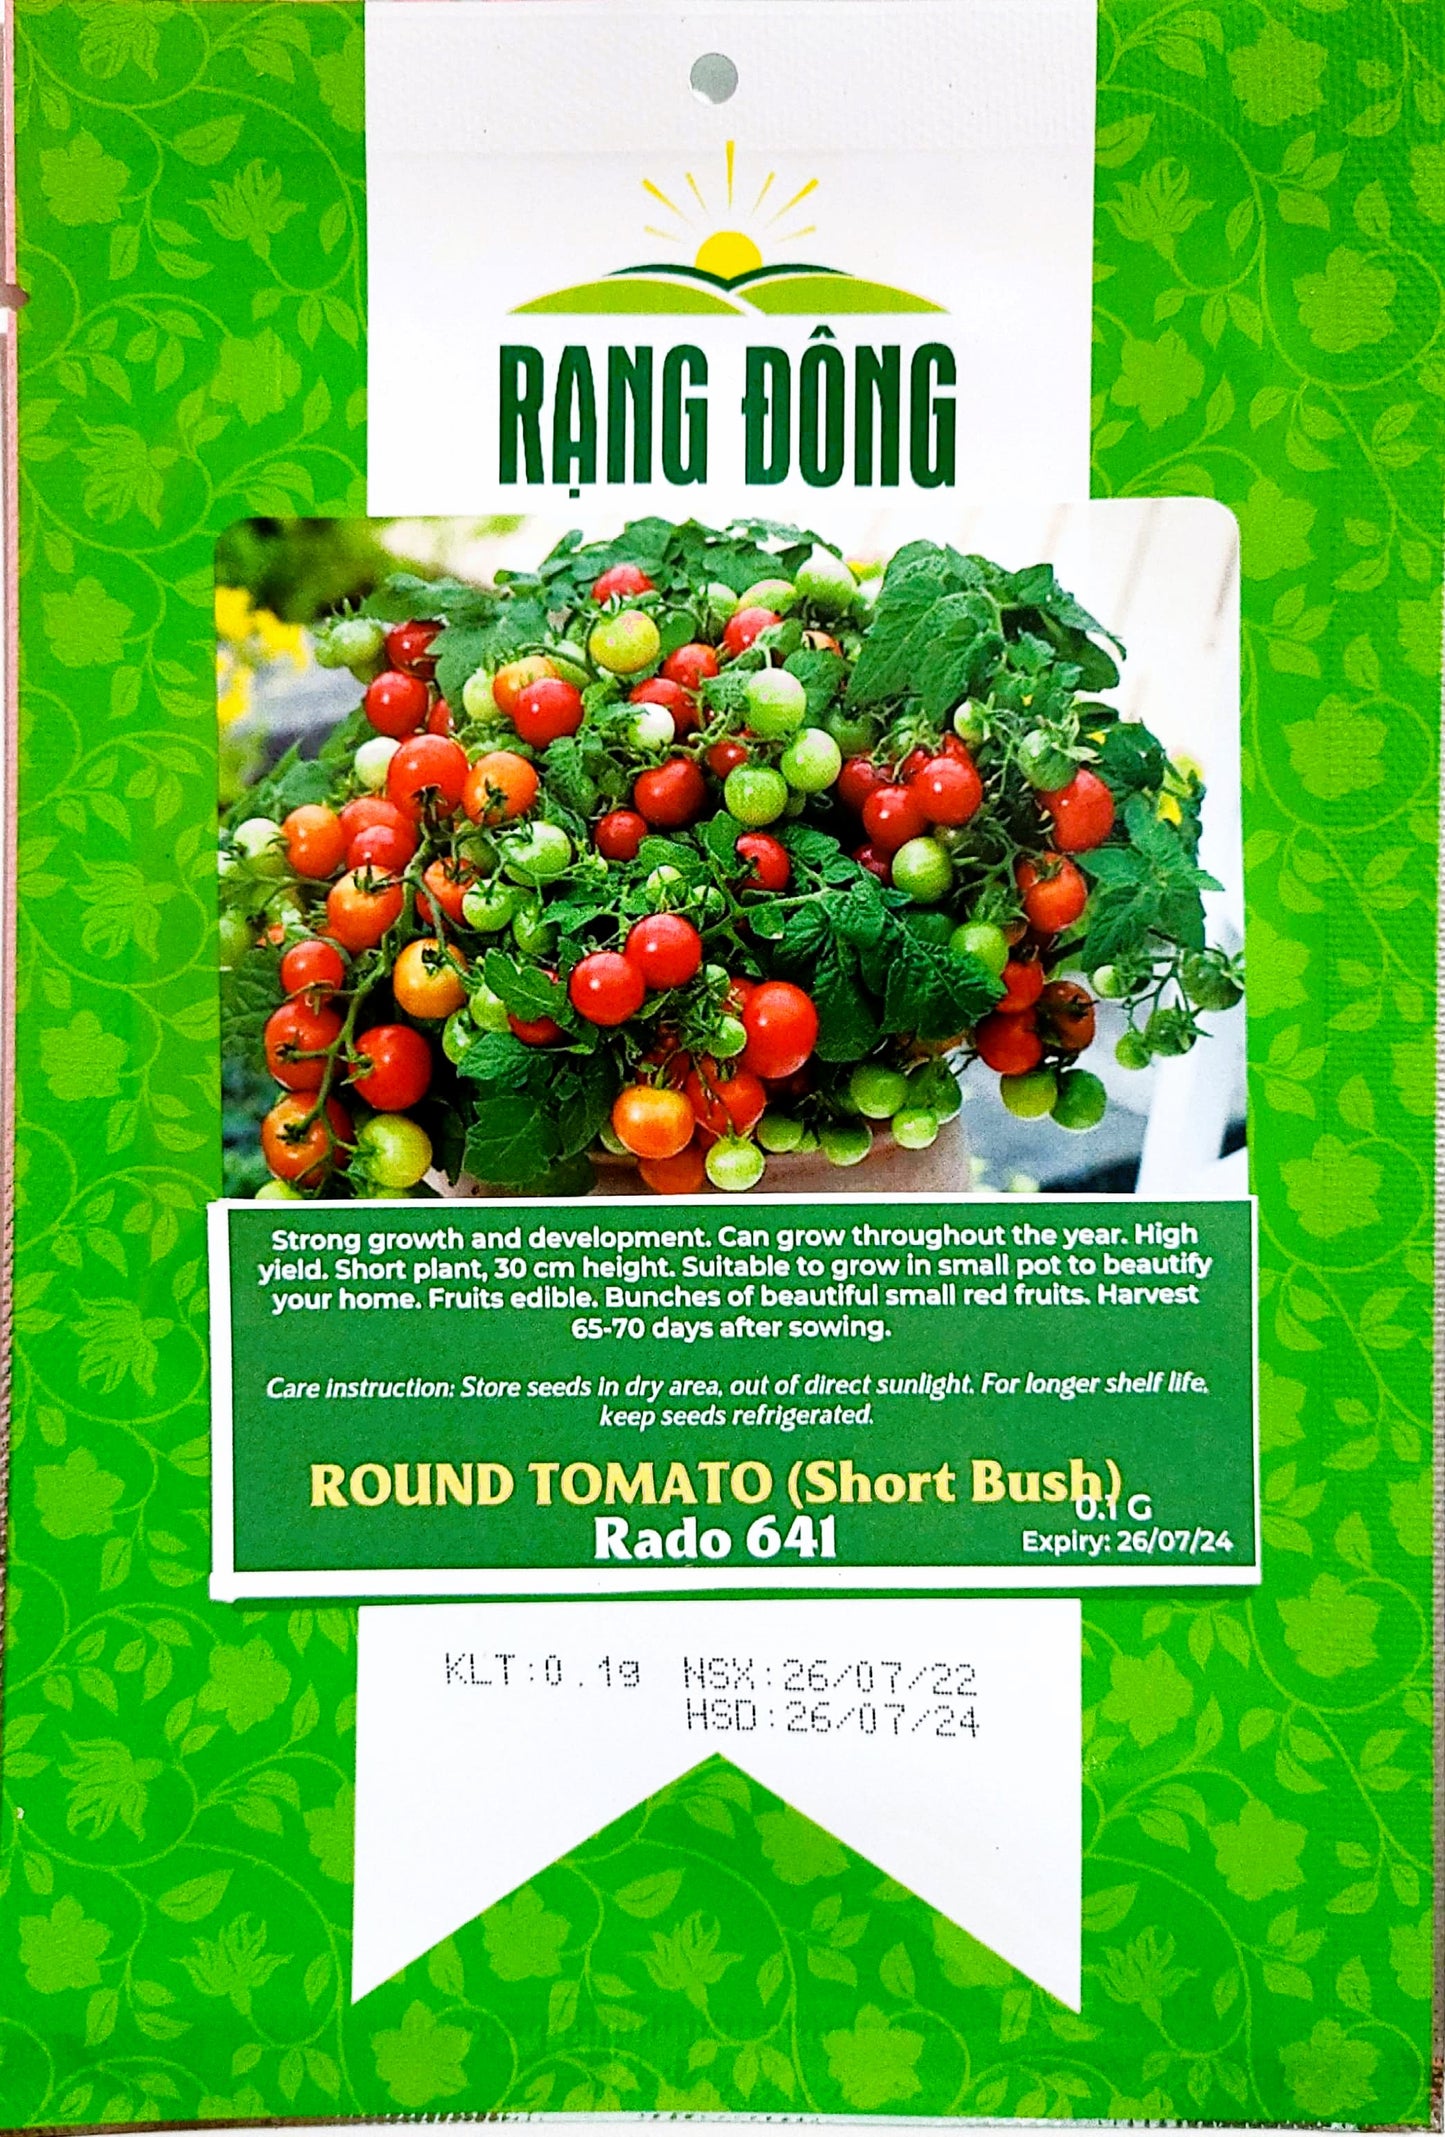 Rang Dong Seeds Collection